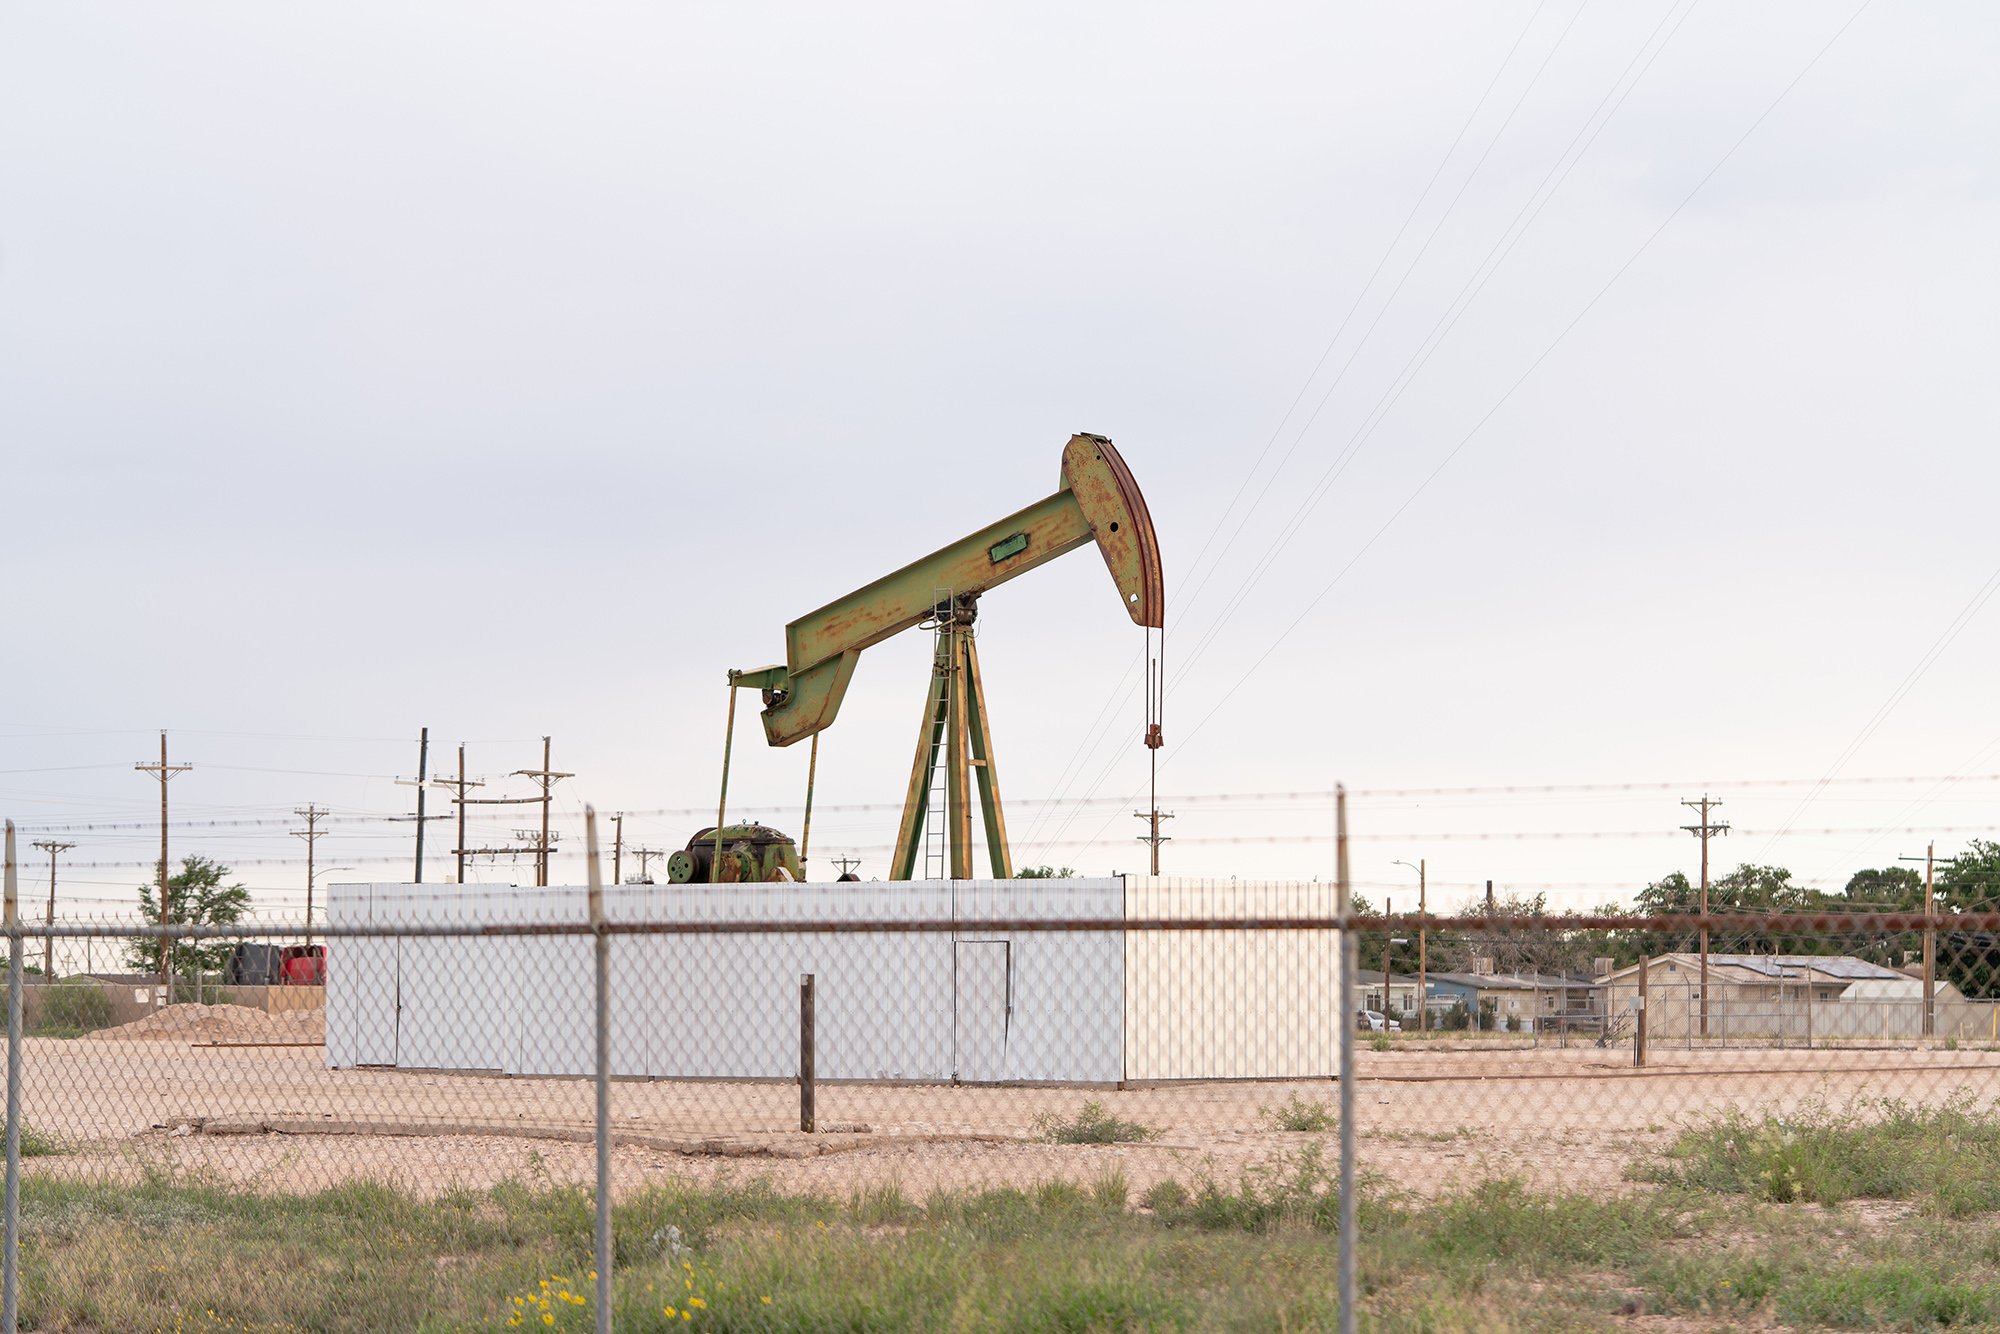 A pumpjack in downtown Hobbs, NM photographed for the Center for Biological Diversity